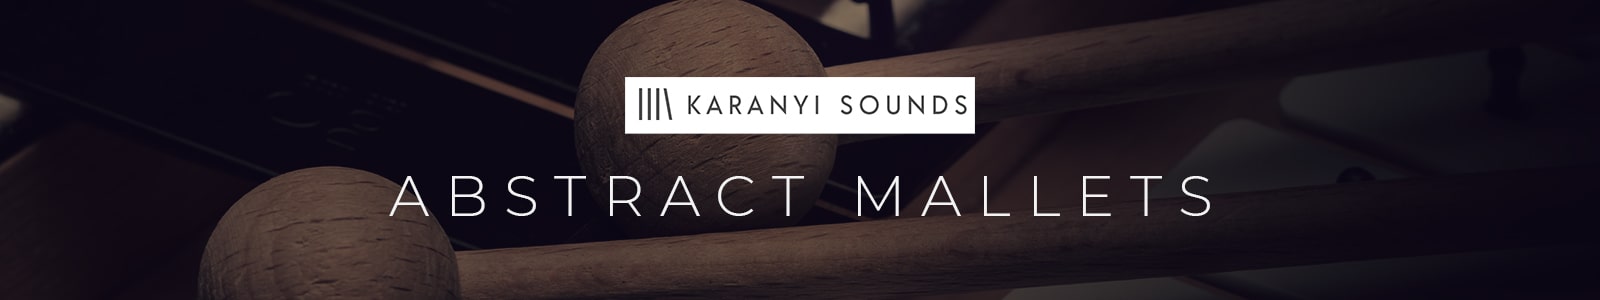 Abstract Mallets by Karanyi Sounds